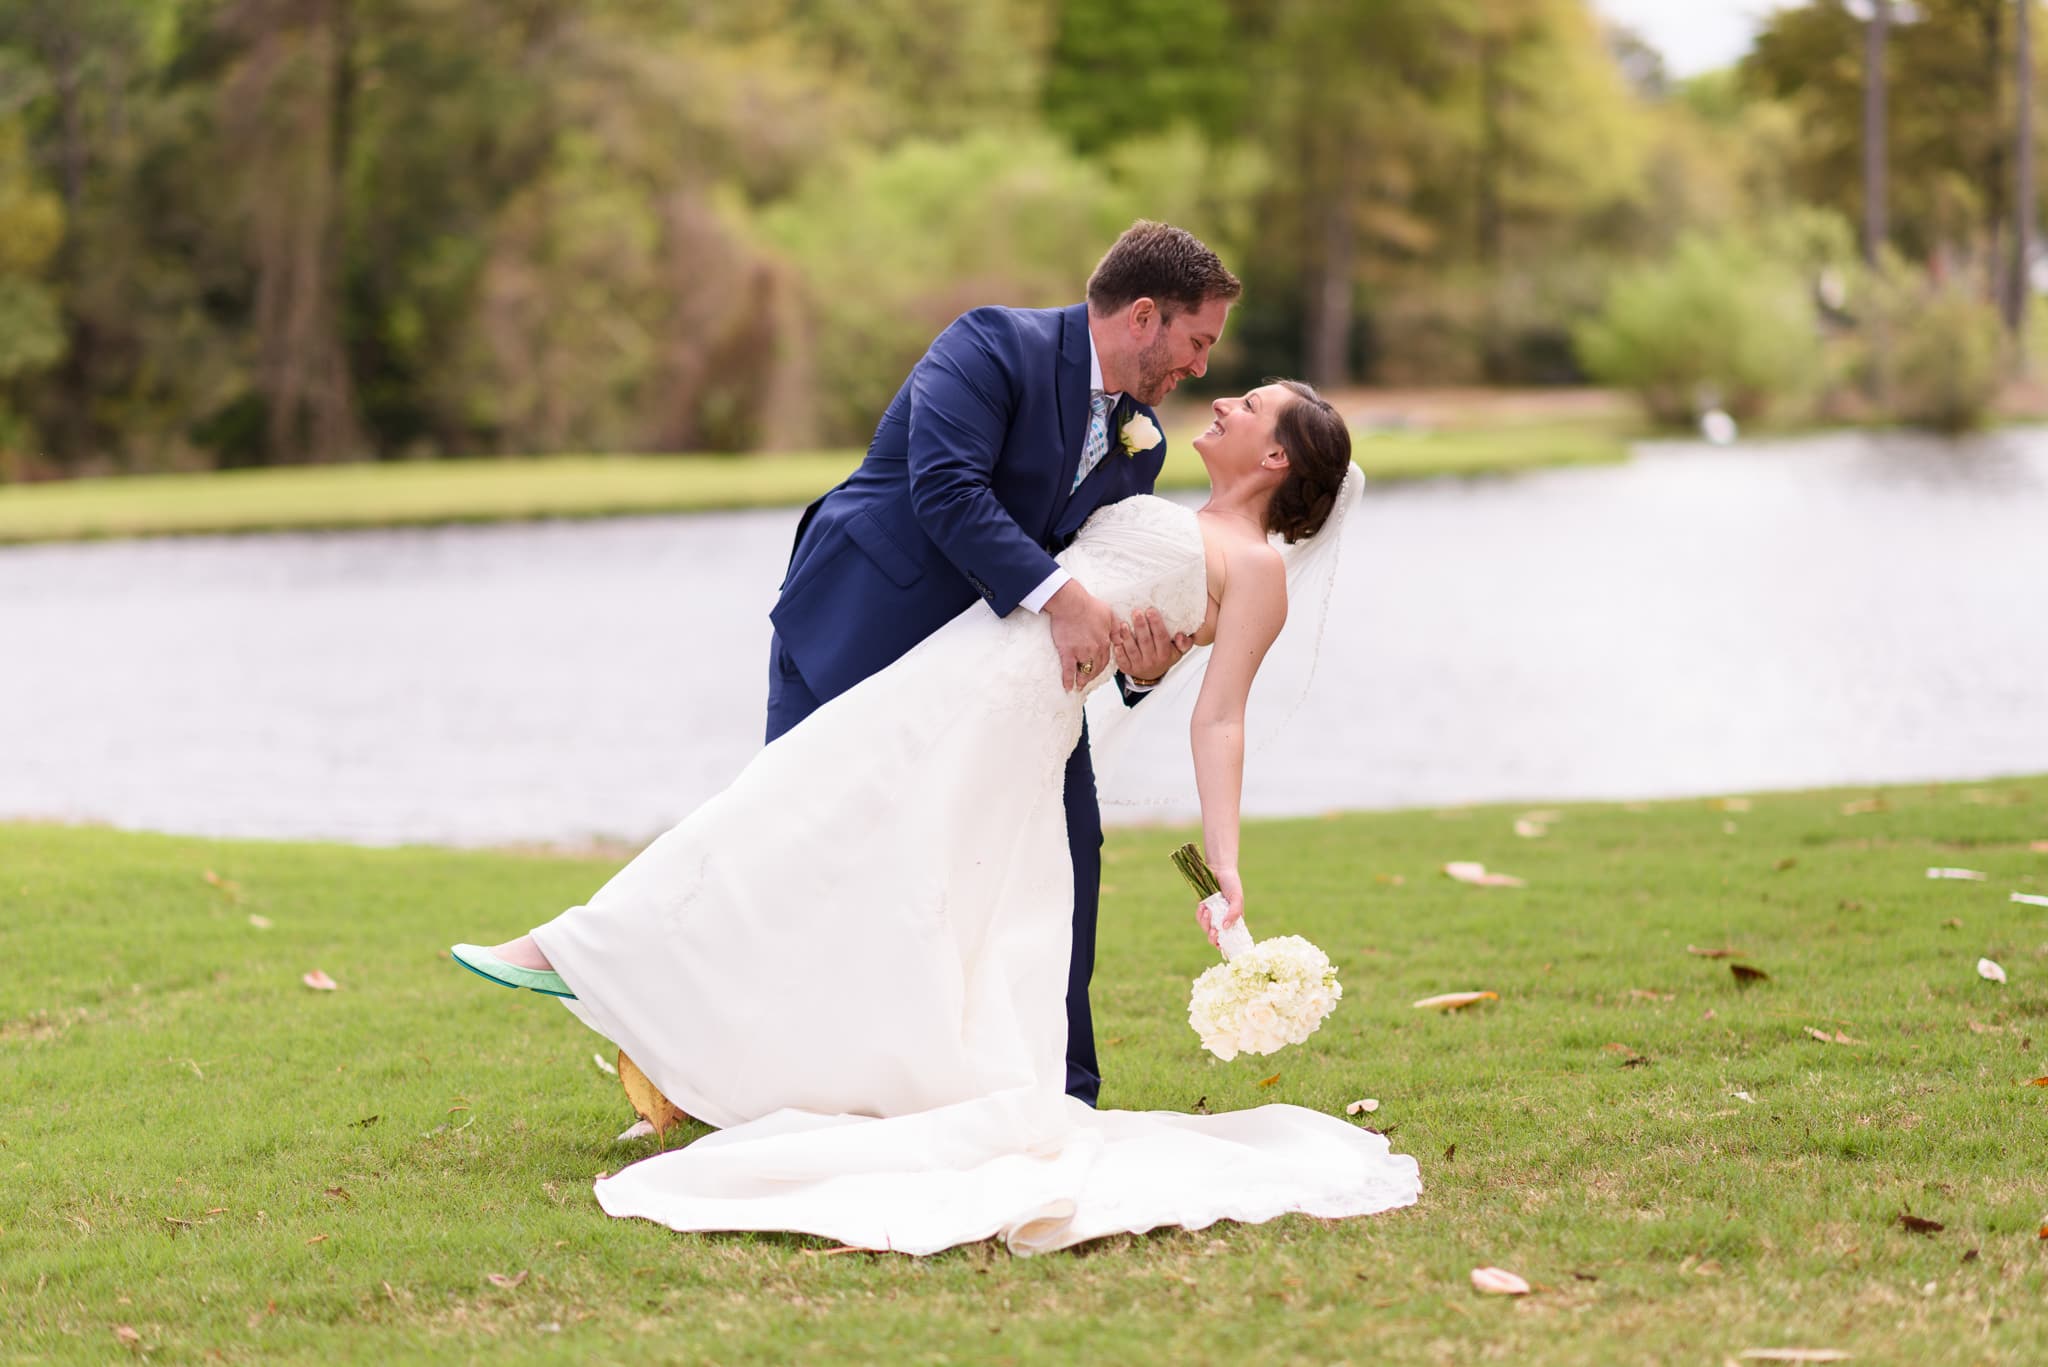 Fun before ceremony pictures with bride and groom - Pawleys Plantation